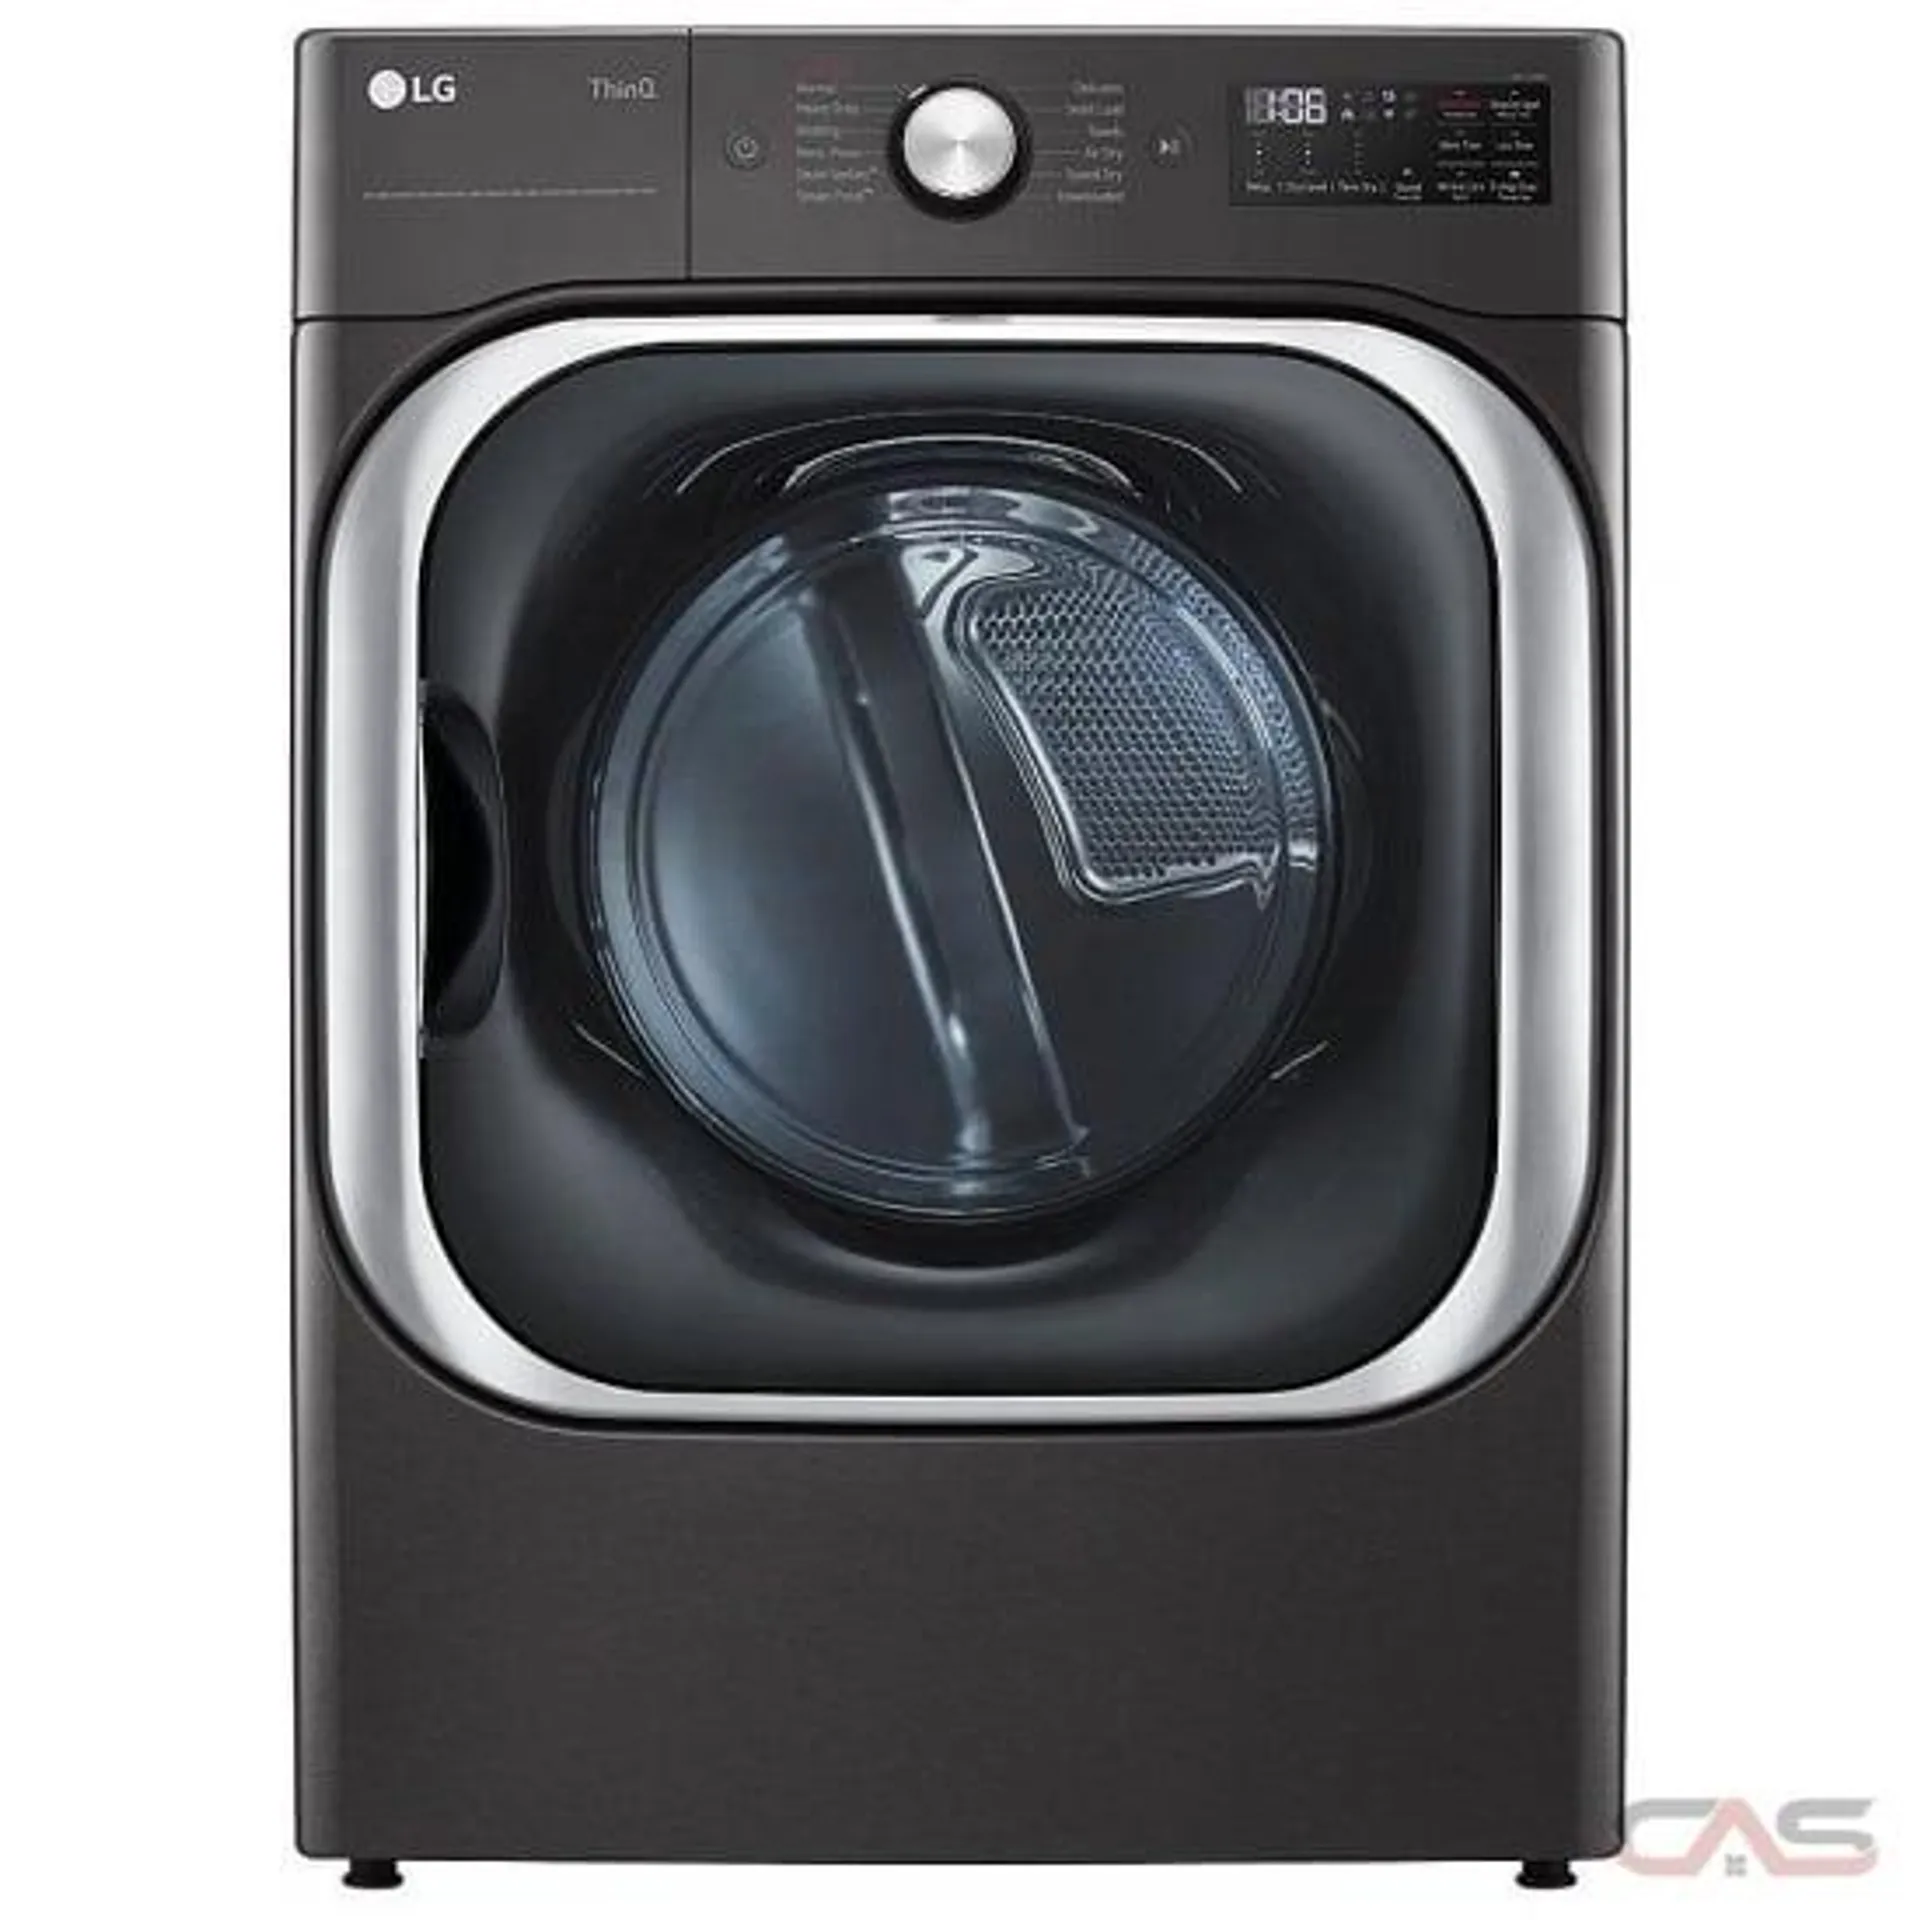 LG DLEX8900B Dryer, 29 inch Width, Electric, 9.0 cu. ft. Capacity, Steam Clean, 5 Temperature Settings, Stackable, Wifi Enabled, Black Stainless Steel colour